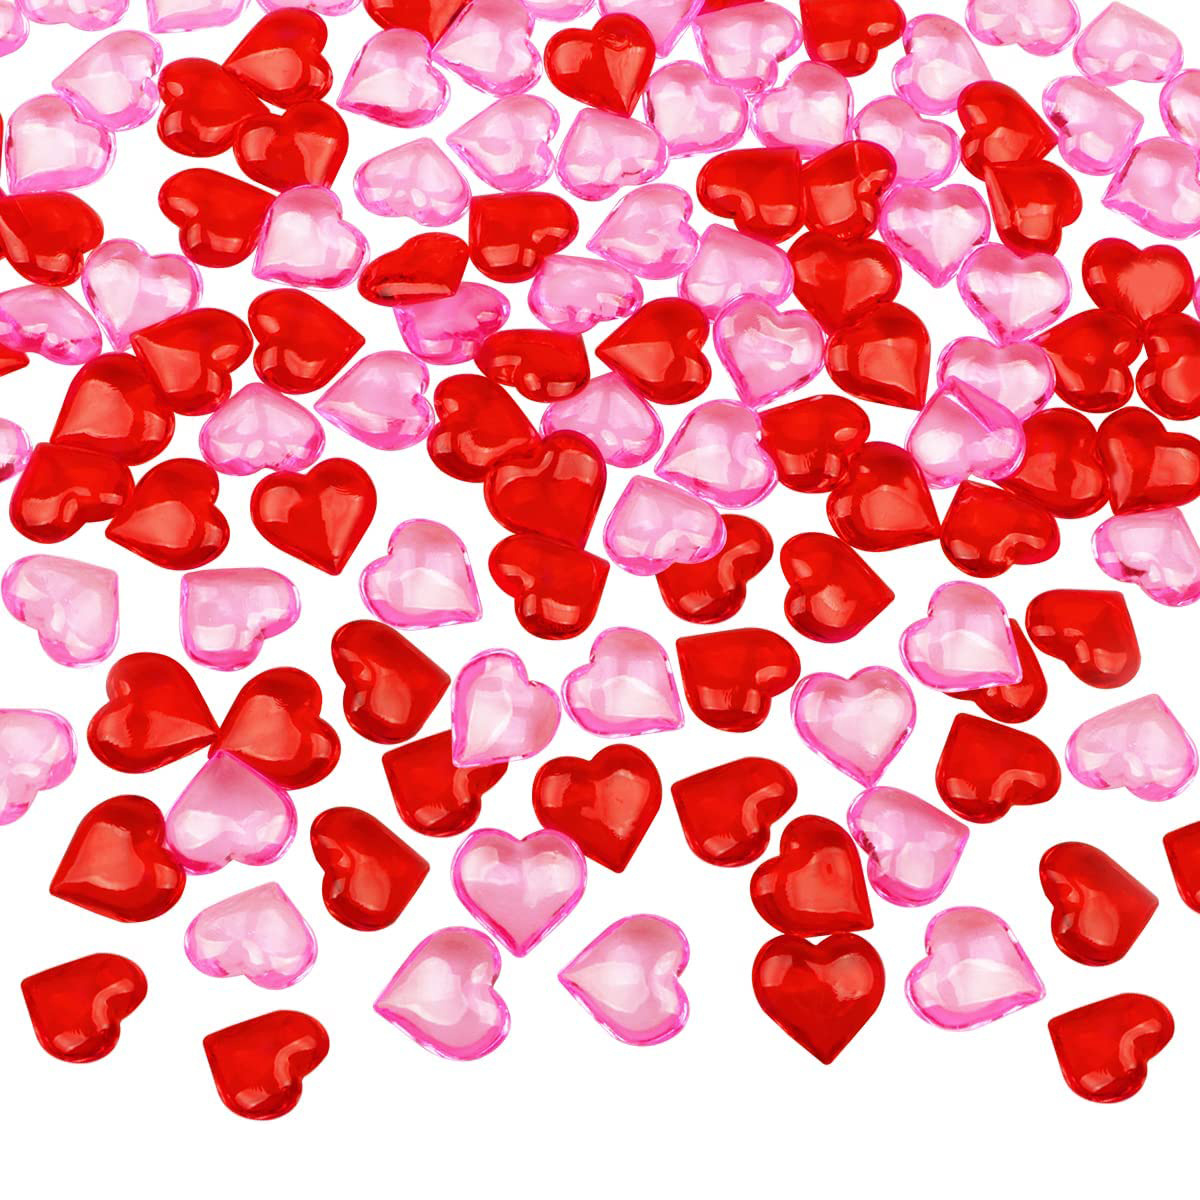 HUIANER Acrylic Heart Gems 1lb Hearts Shaped Crystals Mixed Color Beads for  Valentine's Day Decorations Vase Filler Table Scatter Engagement Wedding